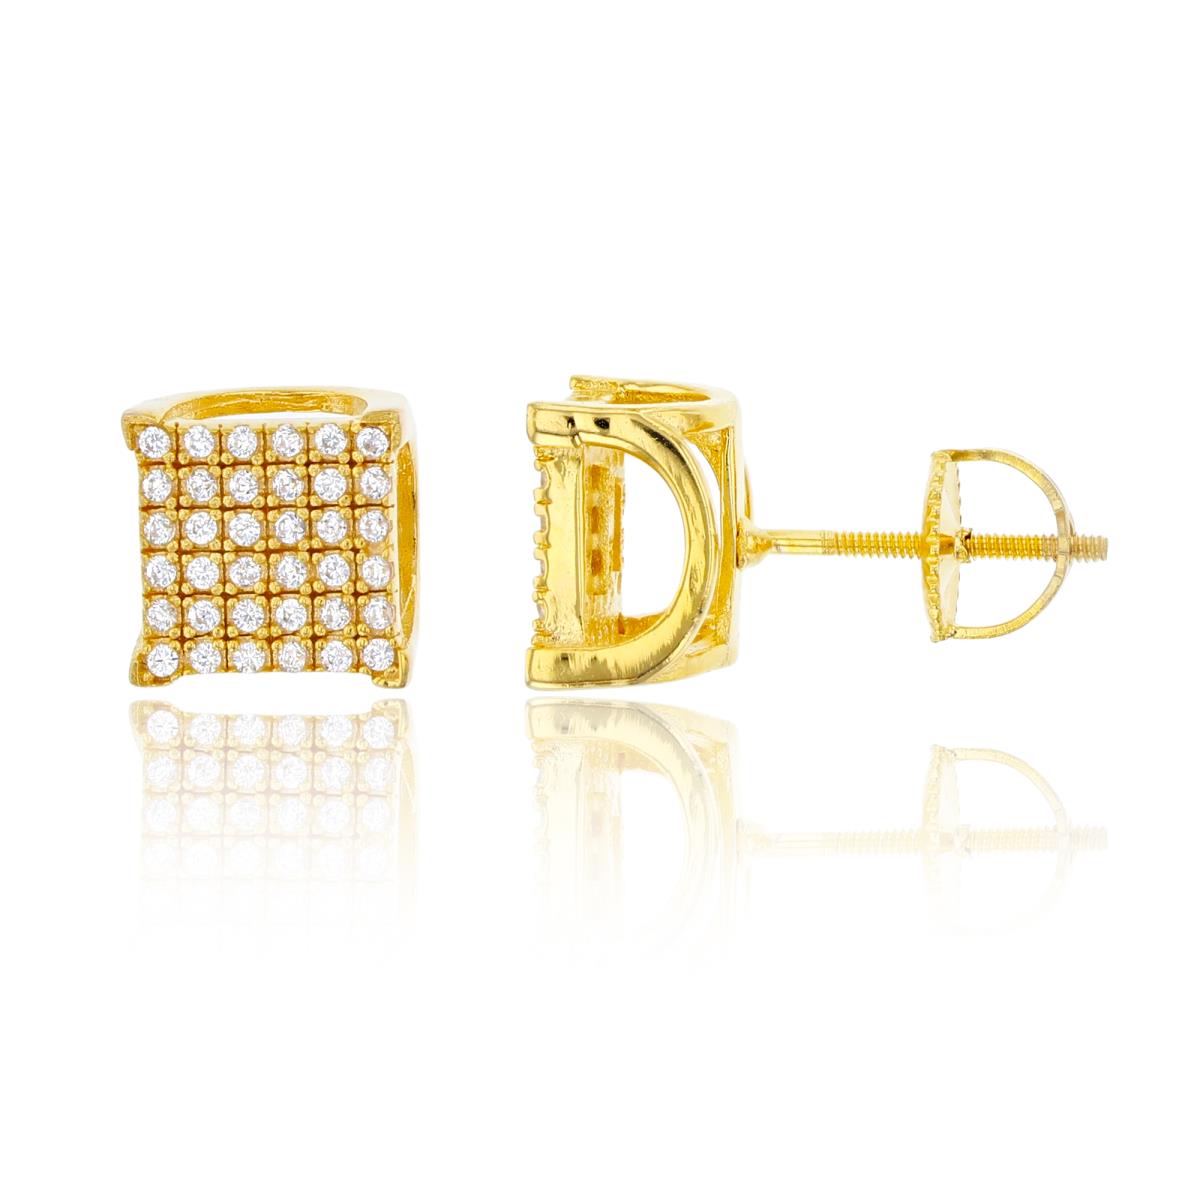 Sterling Silver Yellow 12x12mm 3D Square Screwback Stud Earring